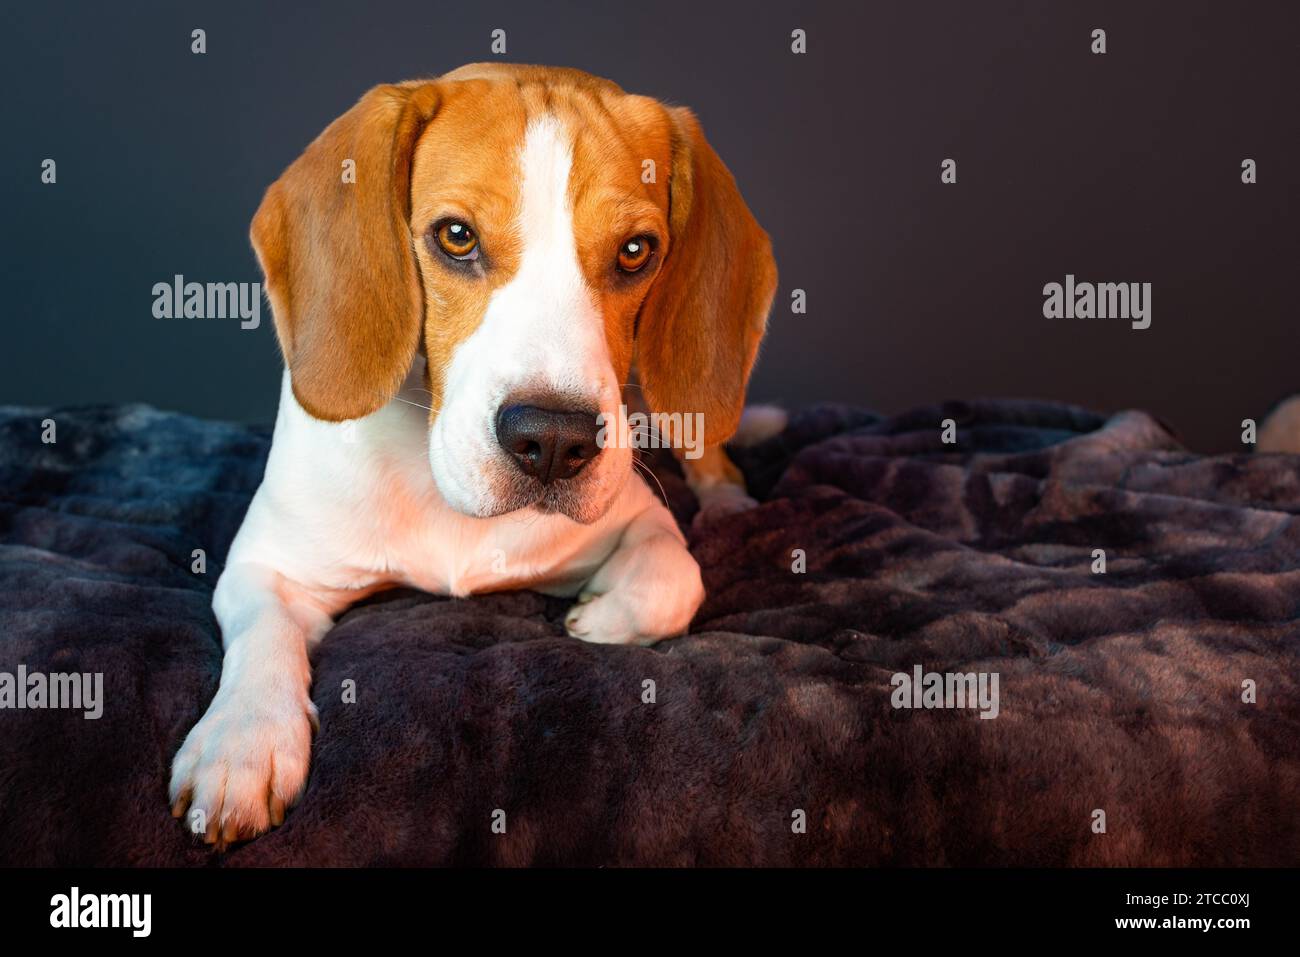 Beagle dog lying down on couch at dark background. Copy space on right Stock Photo